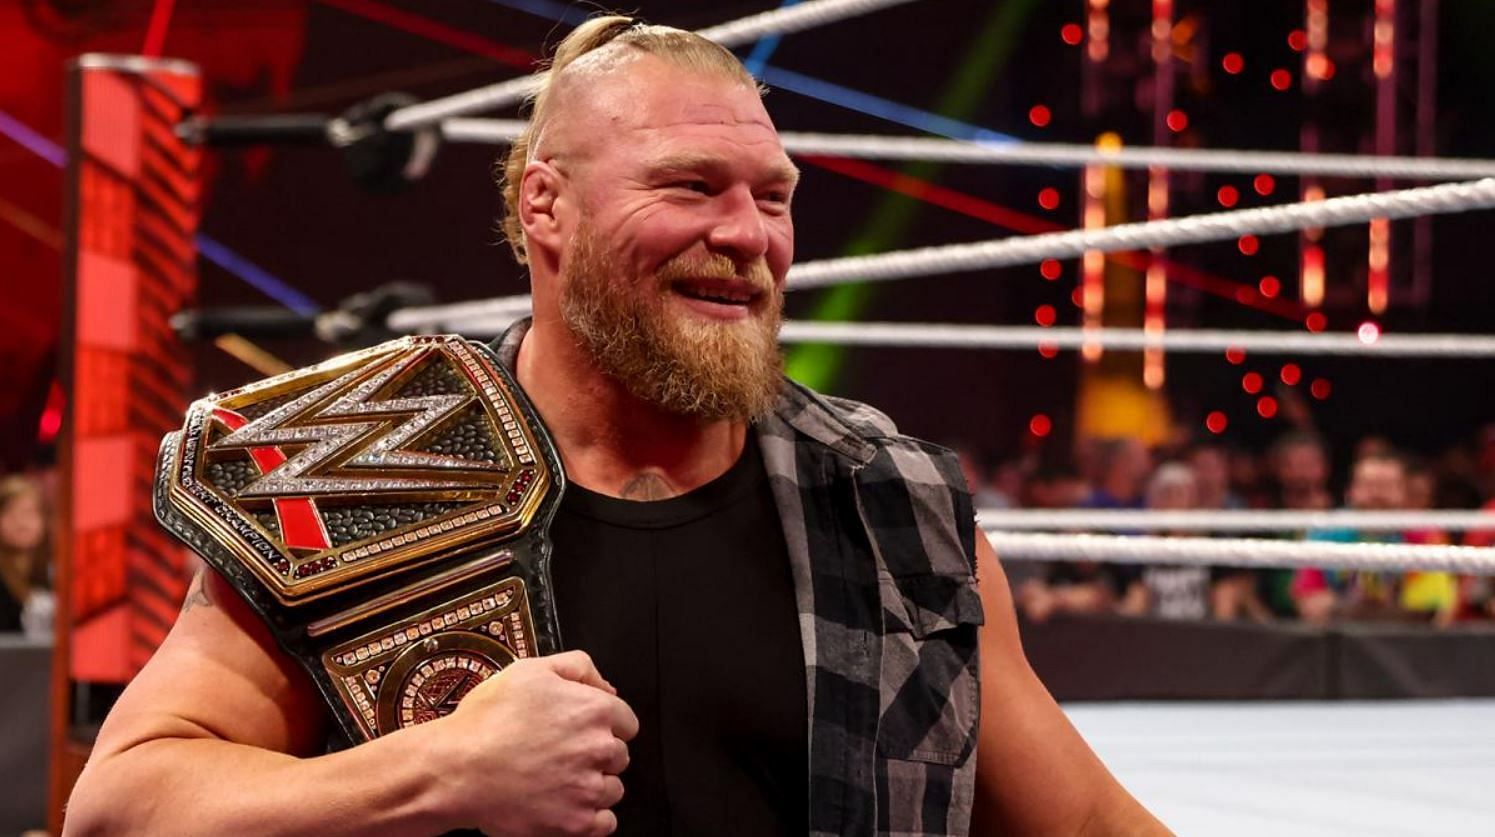 Ronda Rousey and Brock Lesnar have both been successful in MMA and WWE